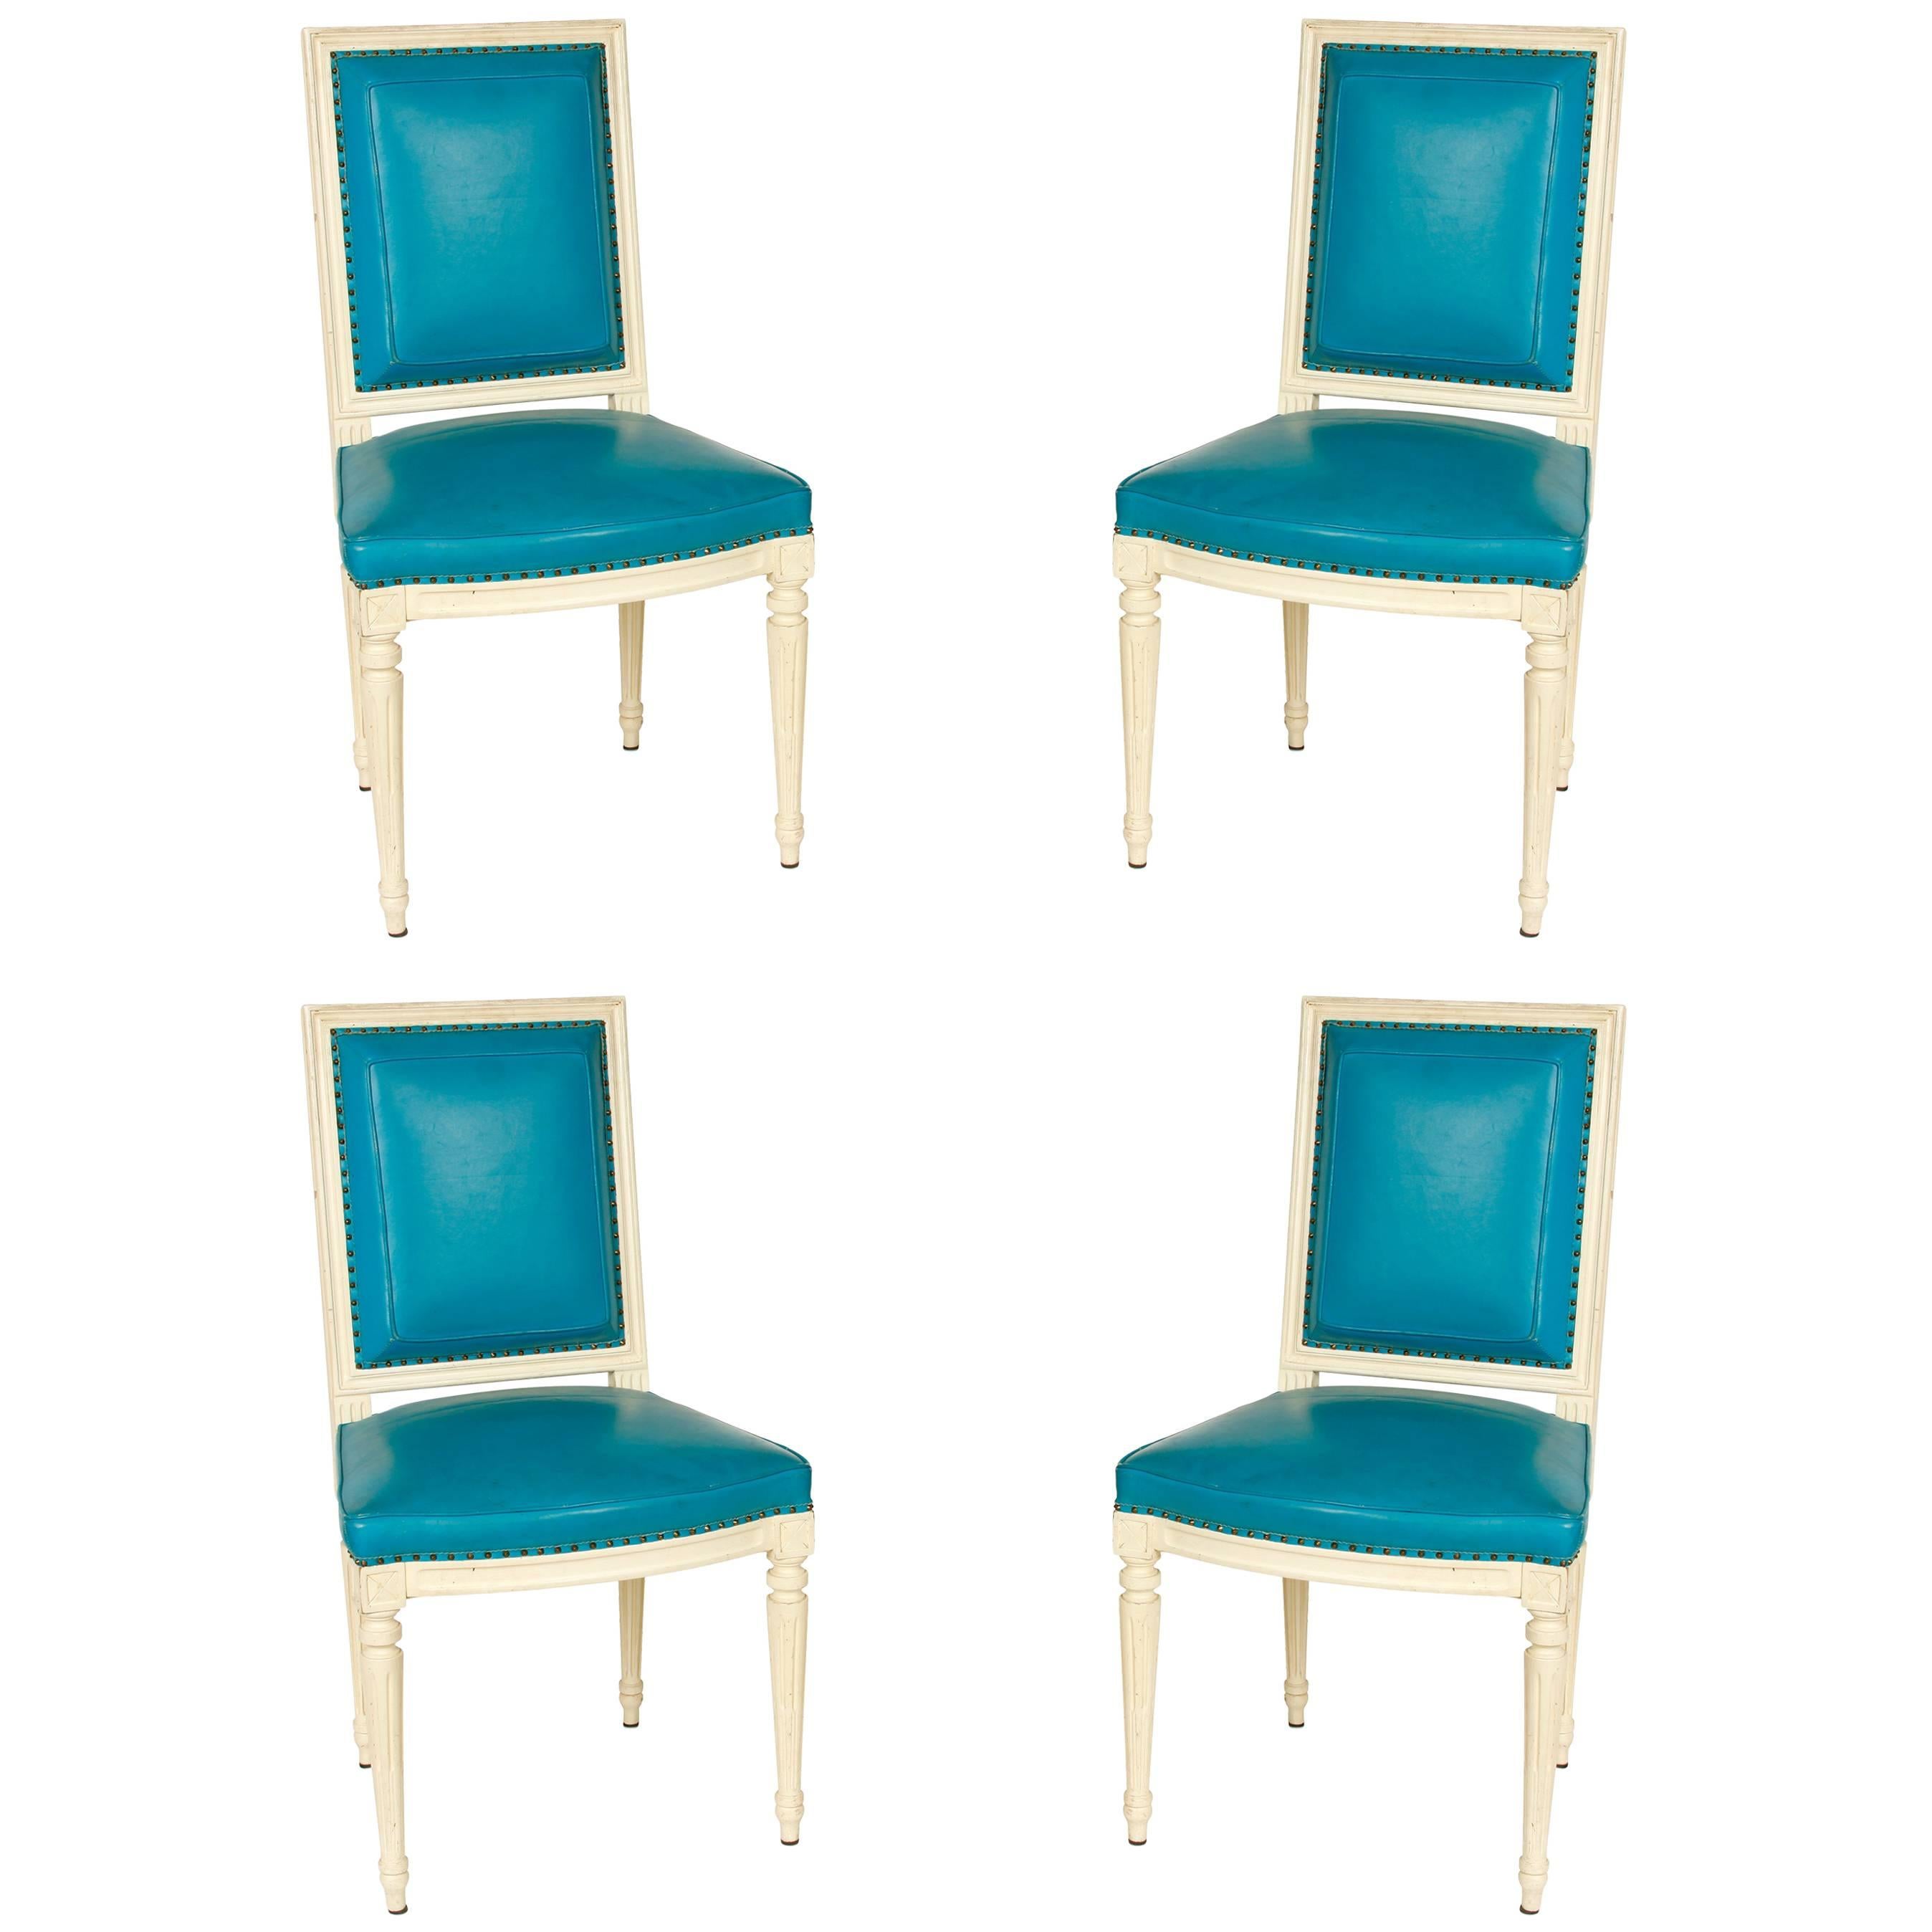 Set of Vintage Louis XVI Style Dining Chairs in Turquoise Leather